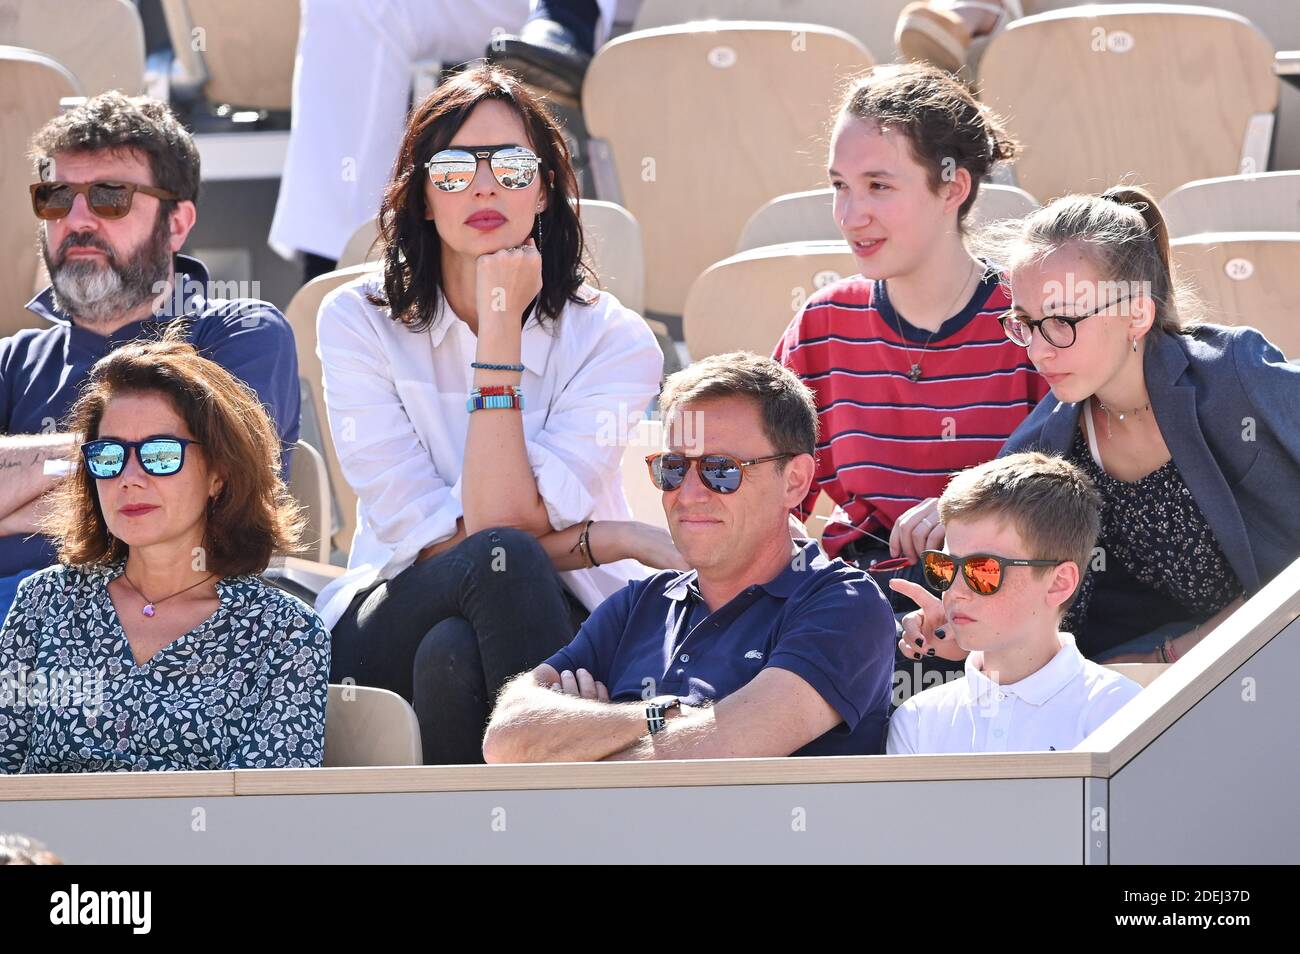 Geraldine Maillet and Daniel Riolo attend the 2019 French Tennis Open - Day  Six in Roland Garros on May 31, 2019 in Paris, France. Photo by Laurent  Zabulon / ABACAPRESS.COM Stock Photo - Alamy